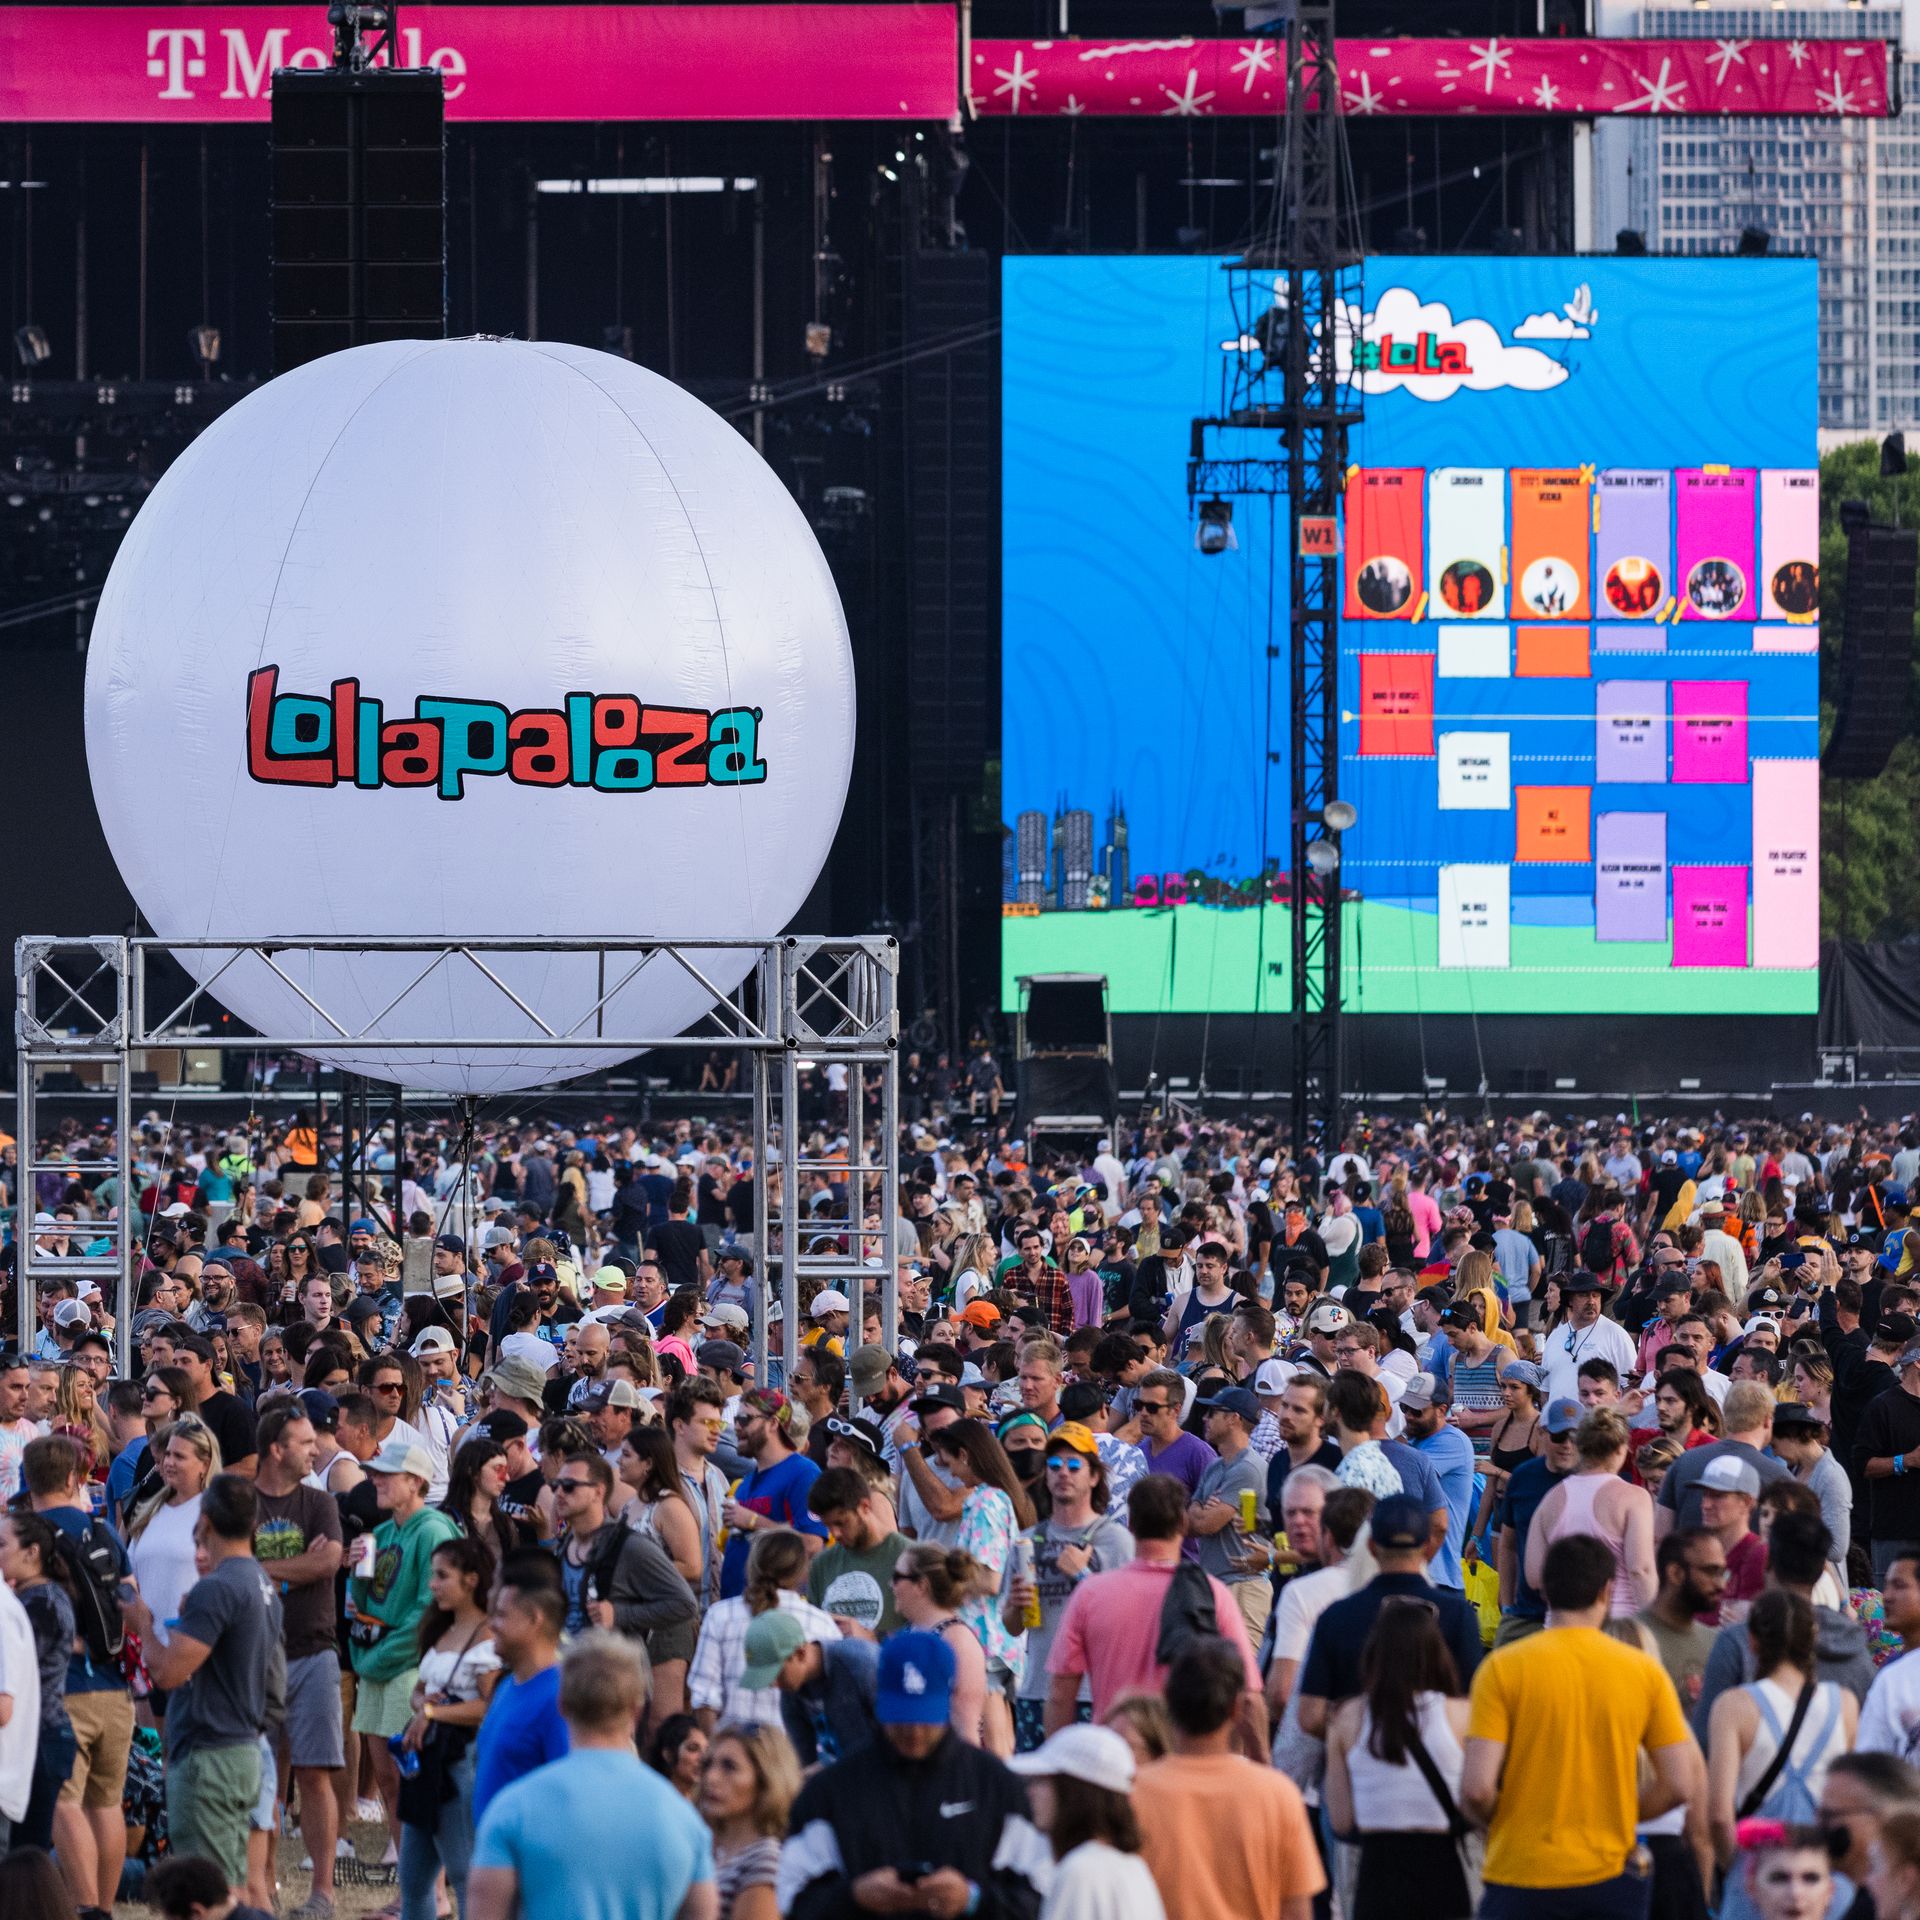 Lollapalooze 2021. Photo by Michael Hickey/Getty Images